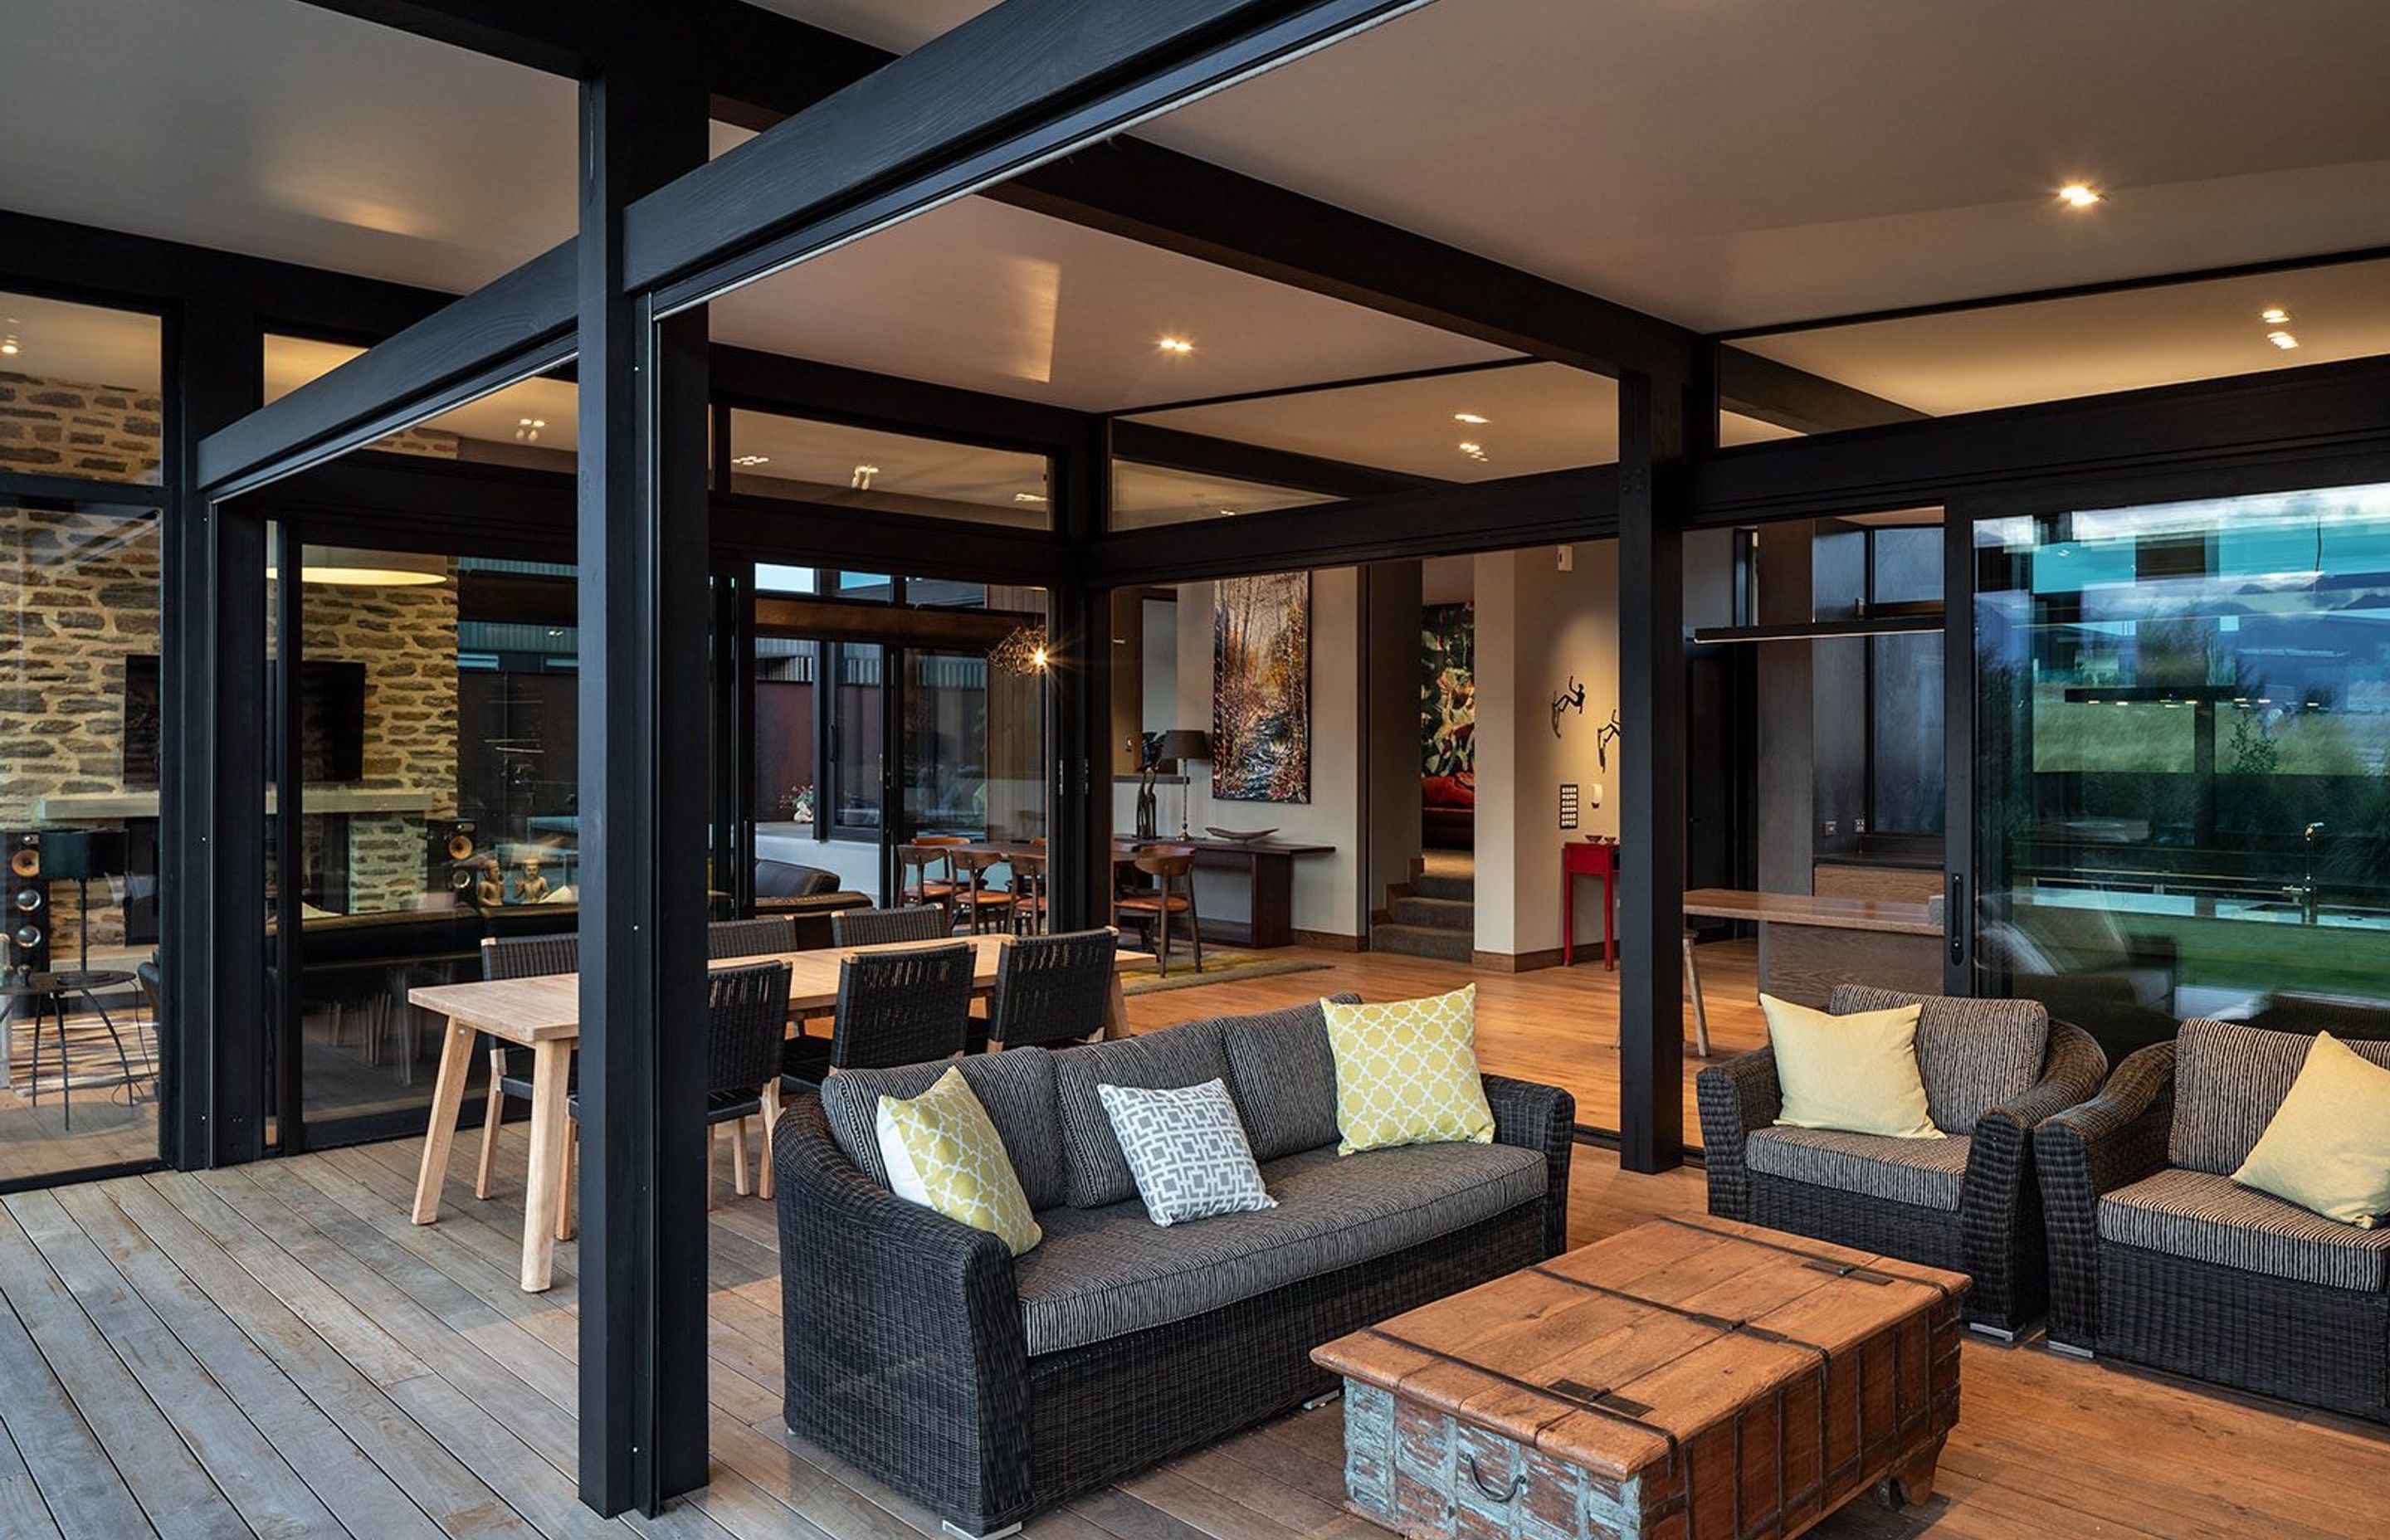 An extension of the main living areas, the outdoor room features a dining area, living area with fireplace and a built-in barbeque for those long summer evenings.